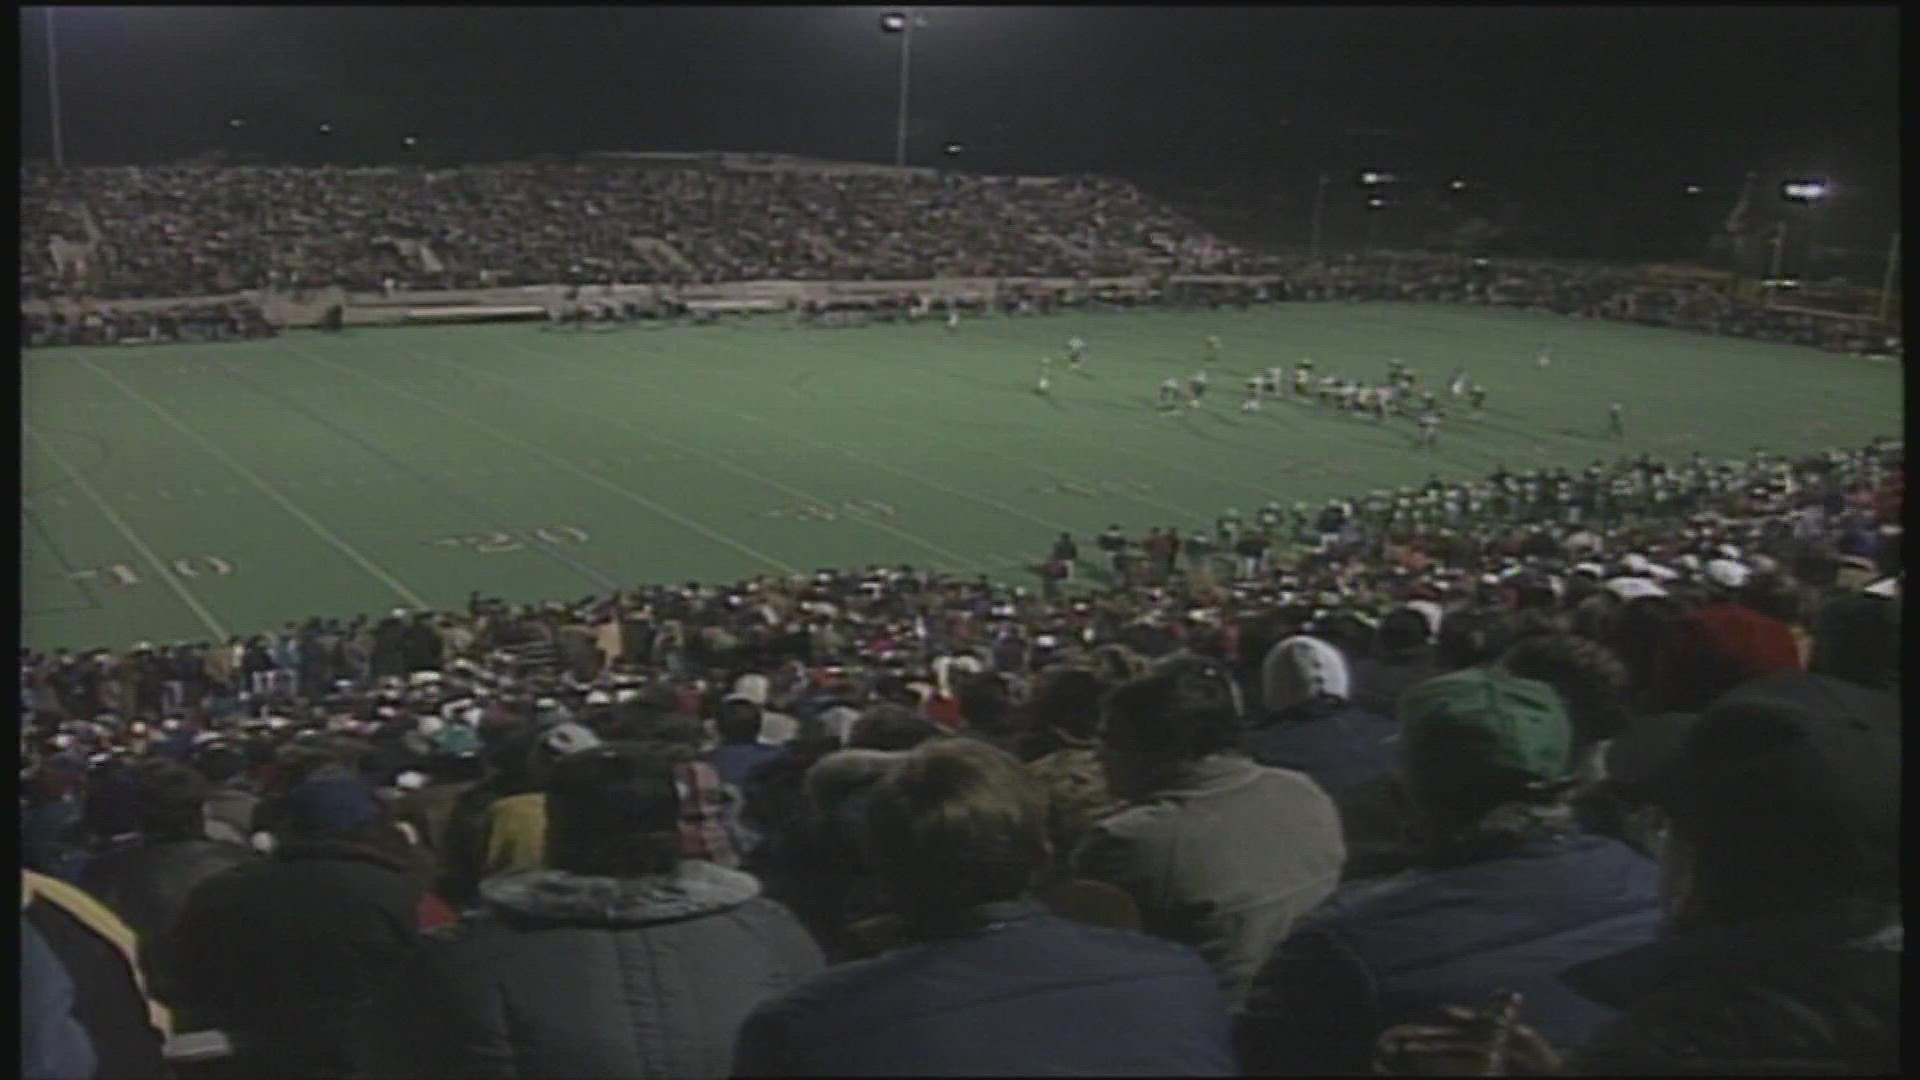 Southlake Carroll and Vernon squared off in an epic playoff game at Pennington Field in 1992. And they're still talking about it today.